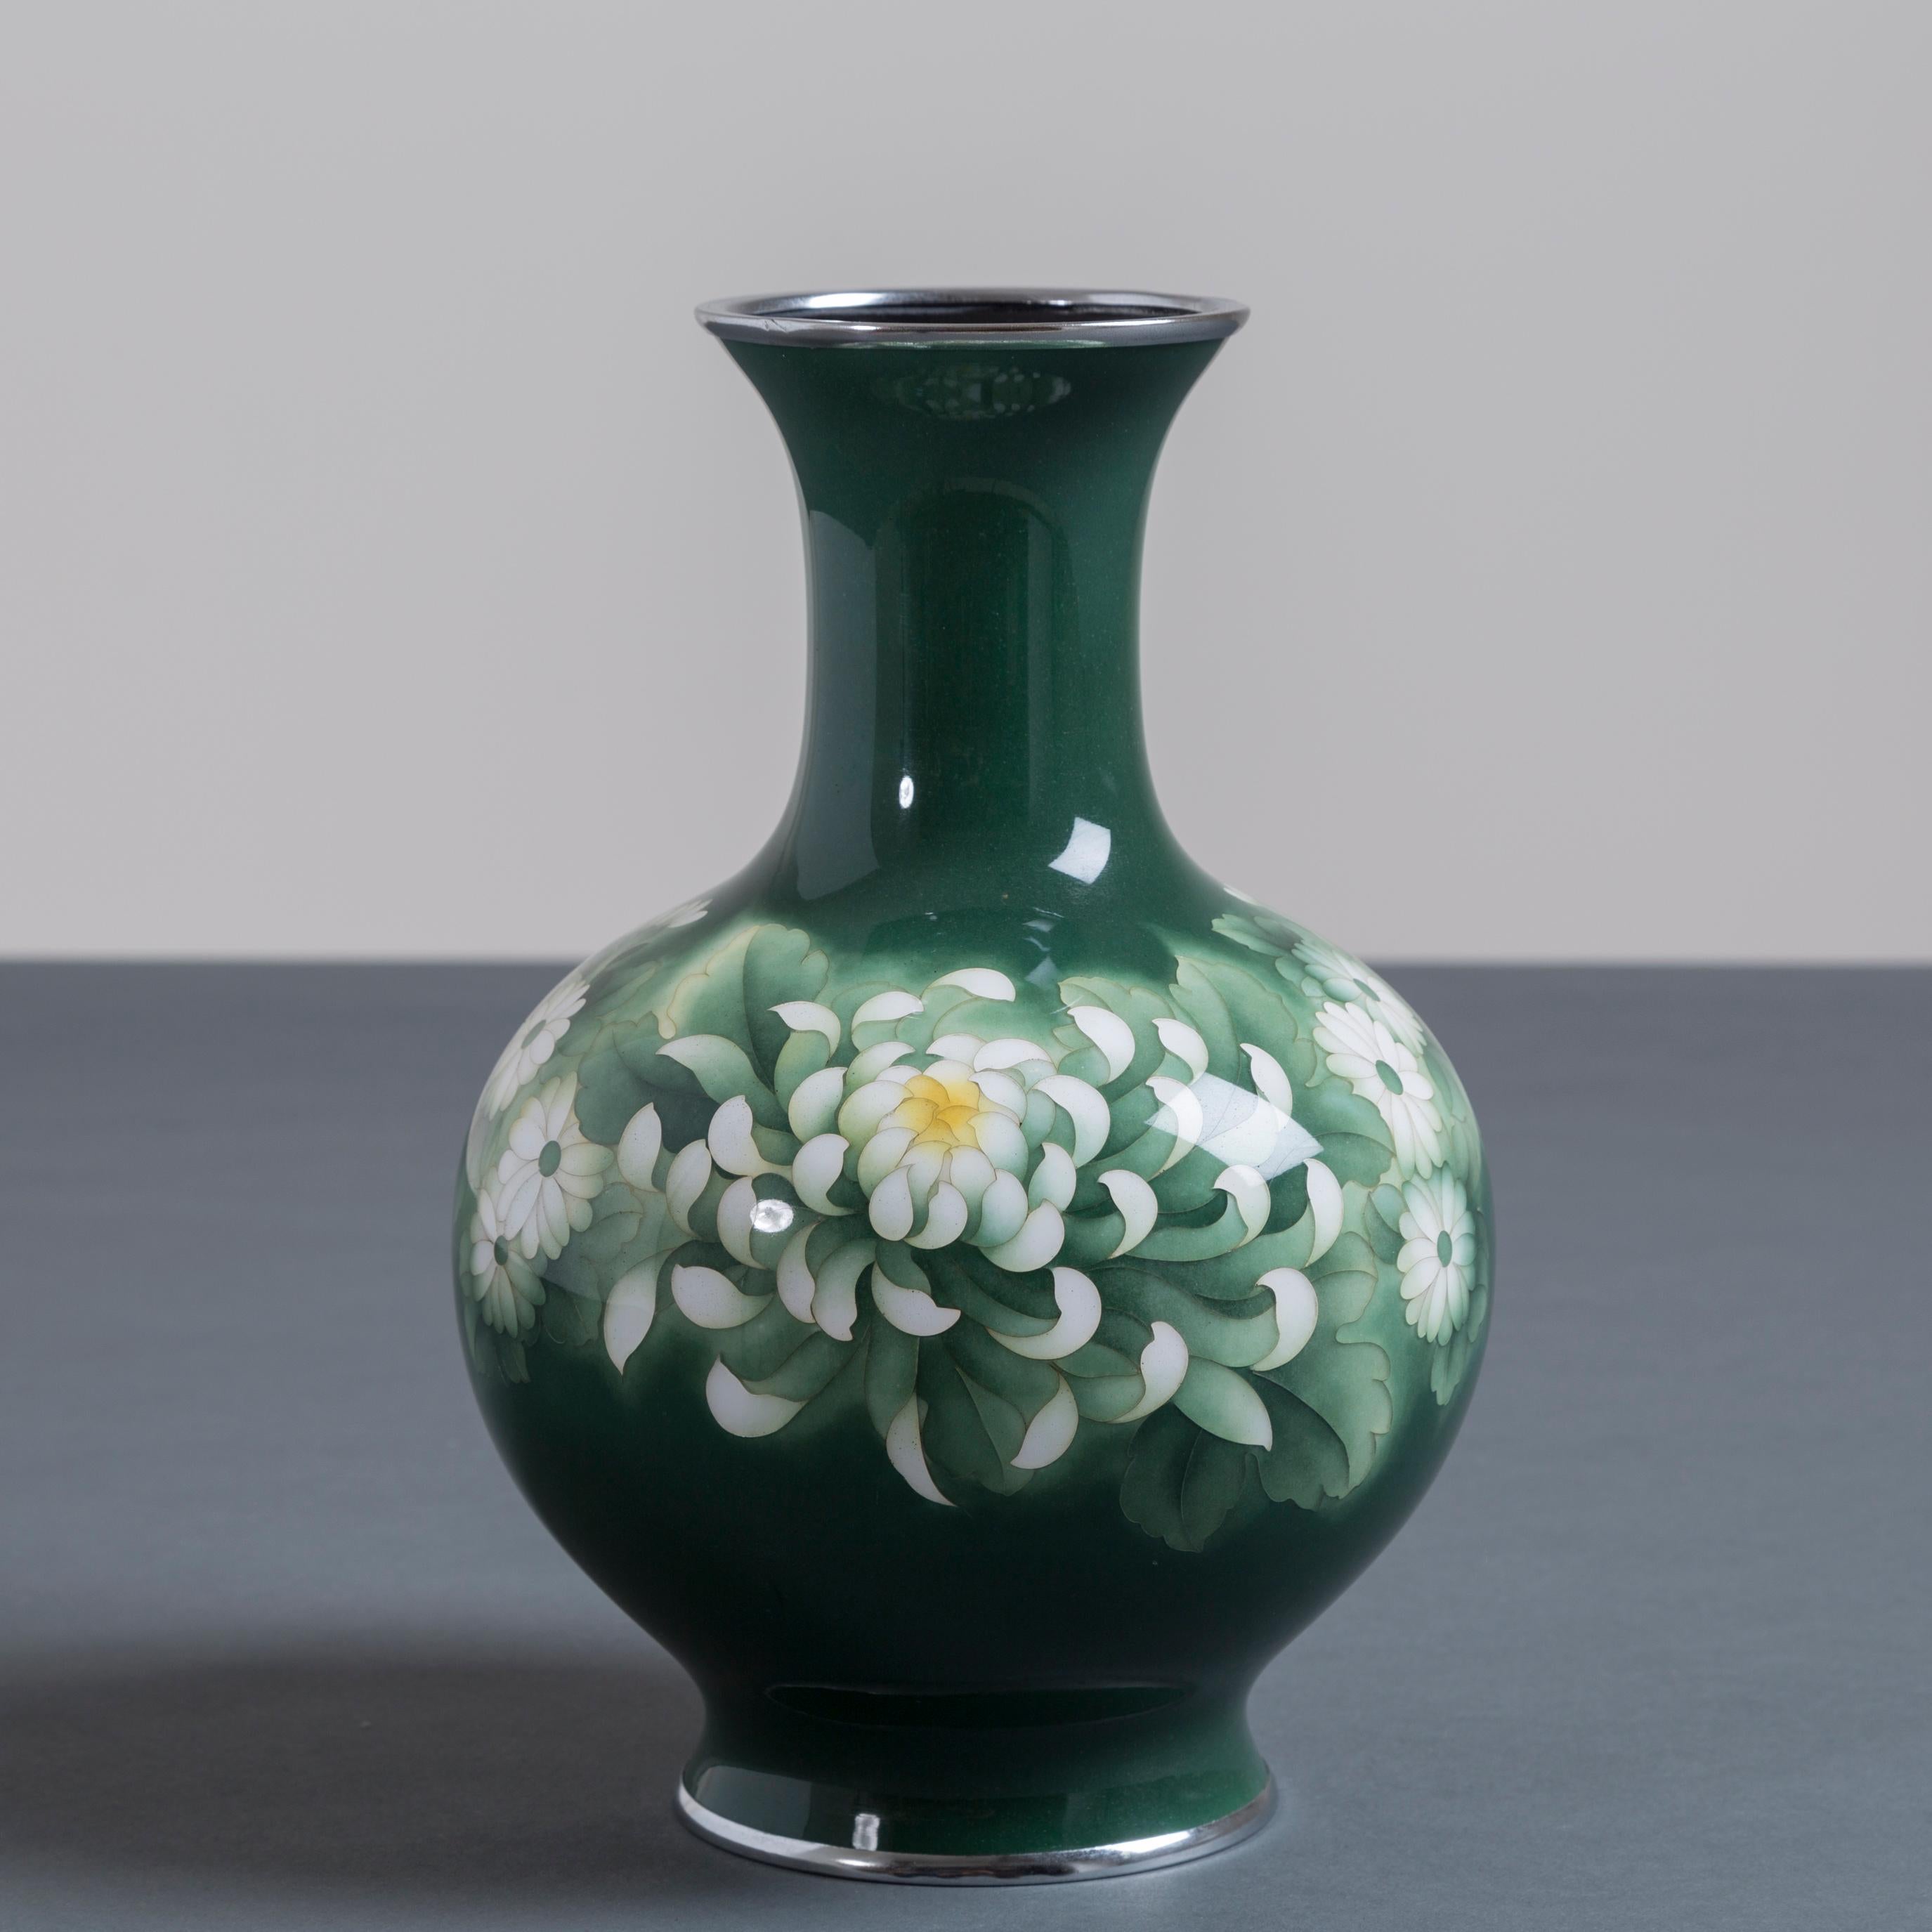 20th Century Japanese Cloisonné Enamel Vase Attributed to Inarba For Sale